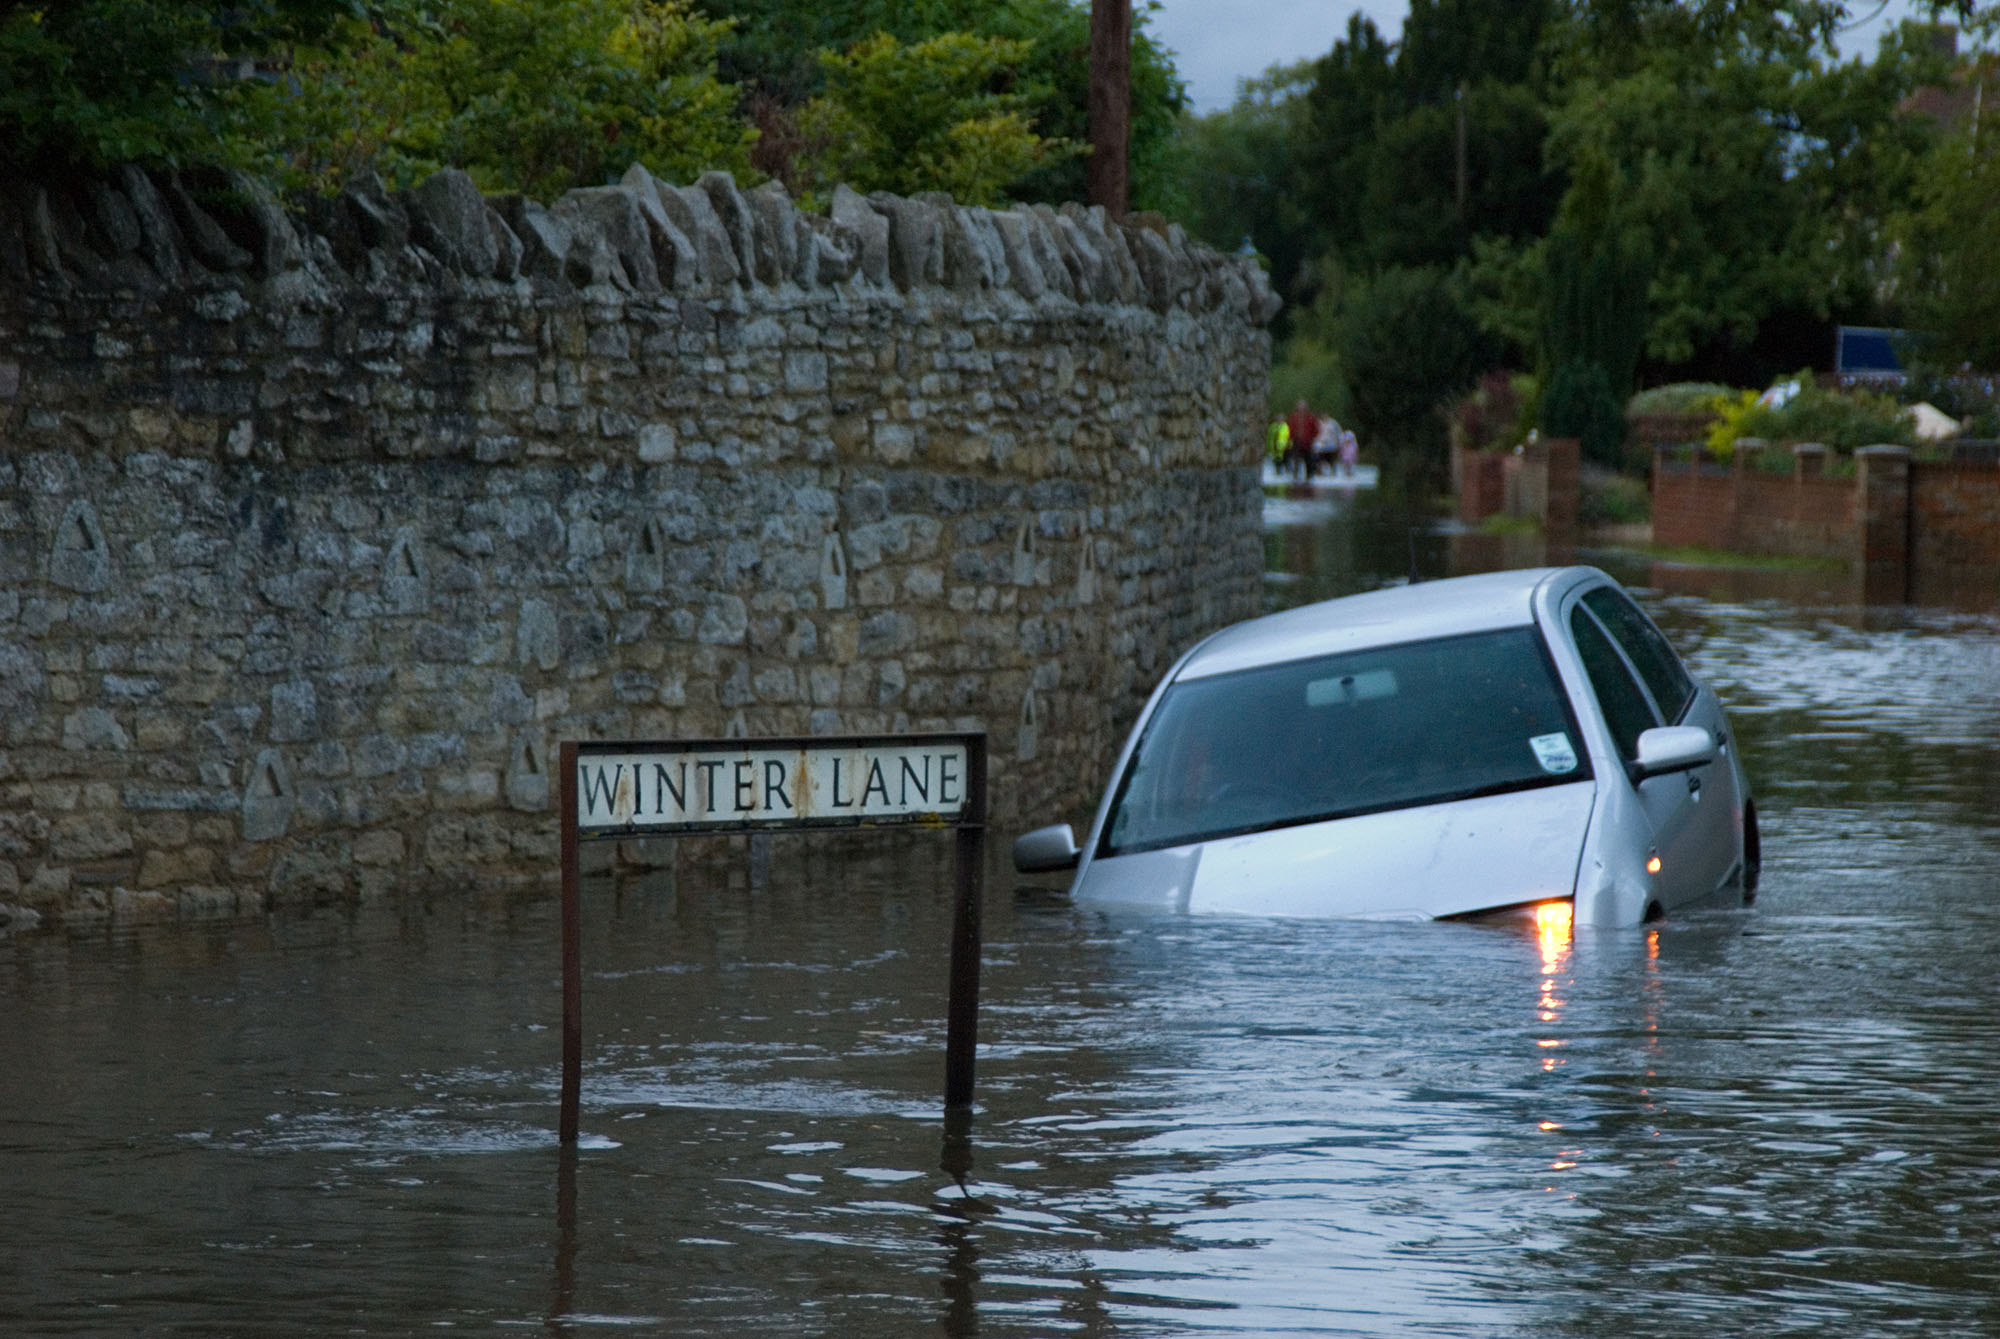 A car sinks halfway into water on a flooded street